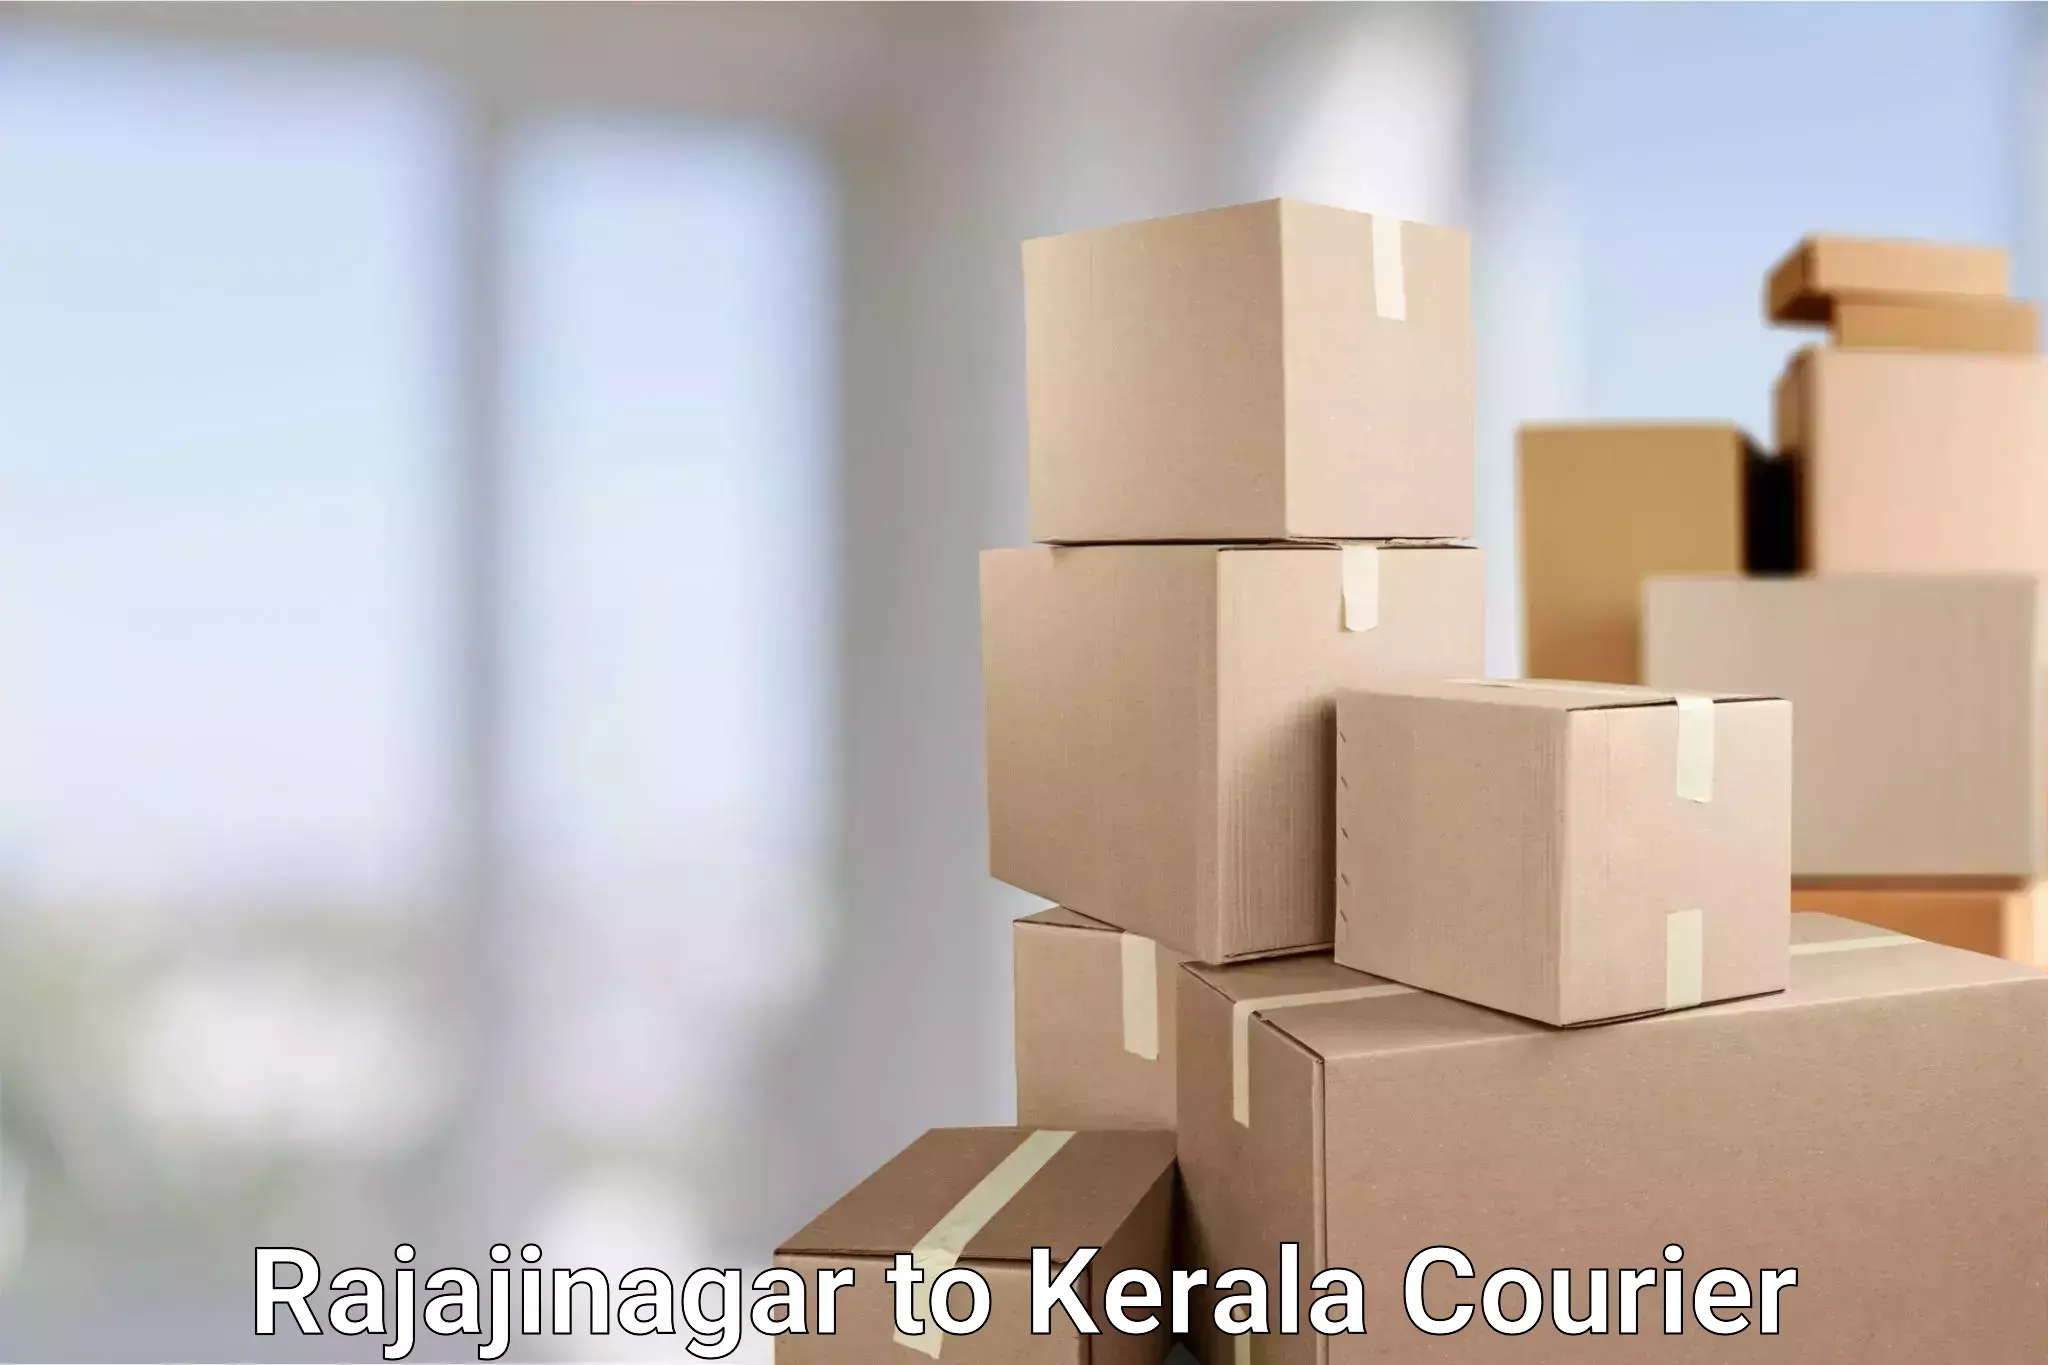 Efficient package consolidation in Rajajinagar to Sultan Bathery